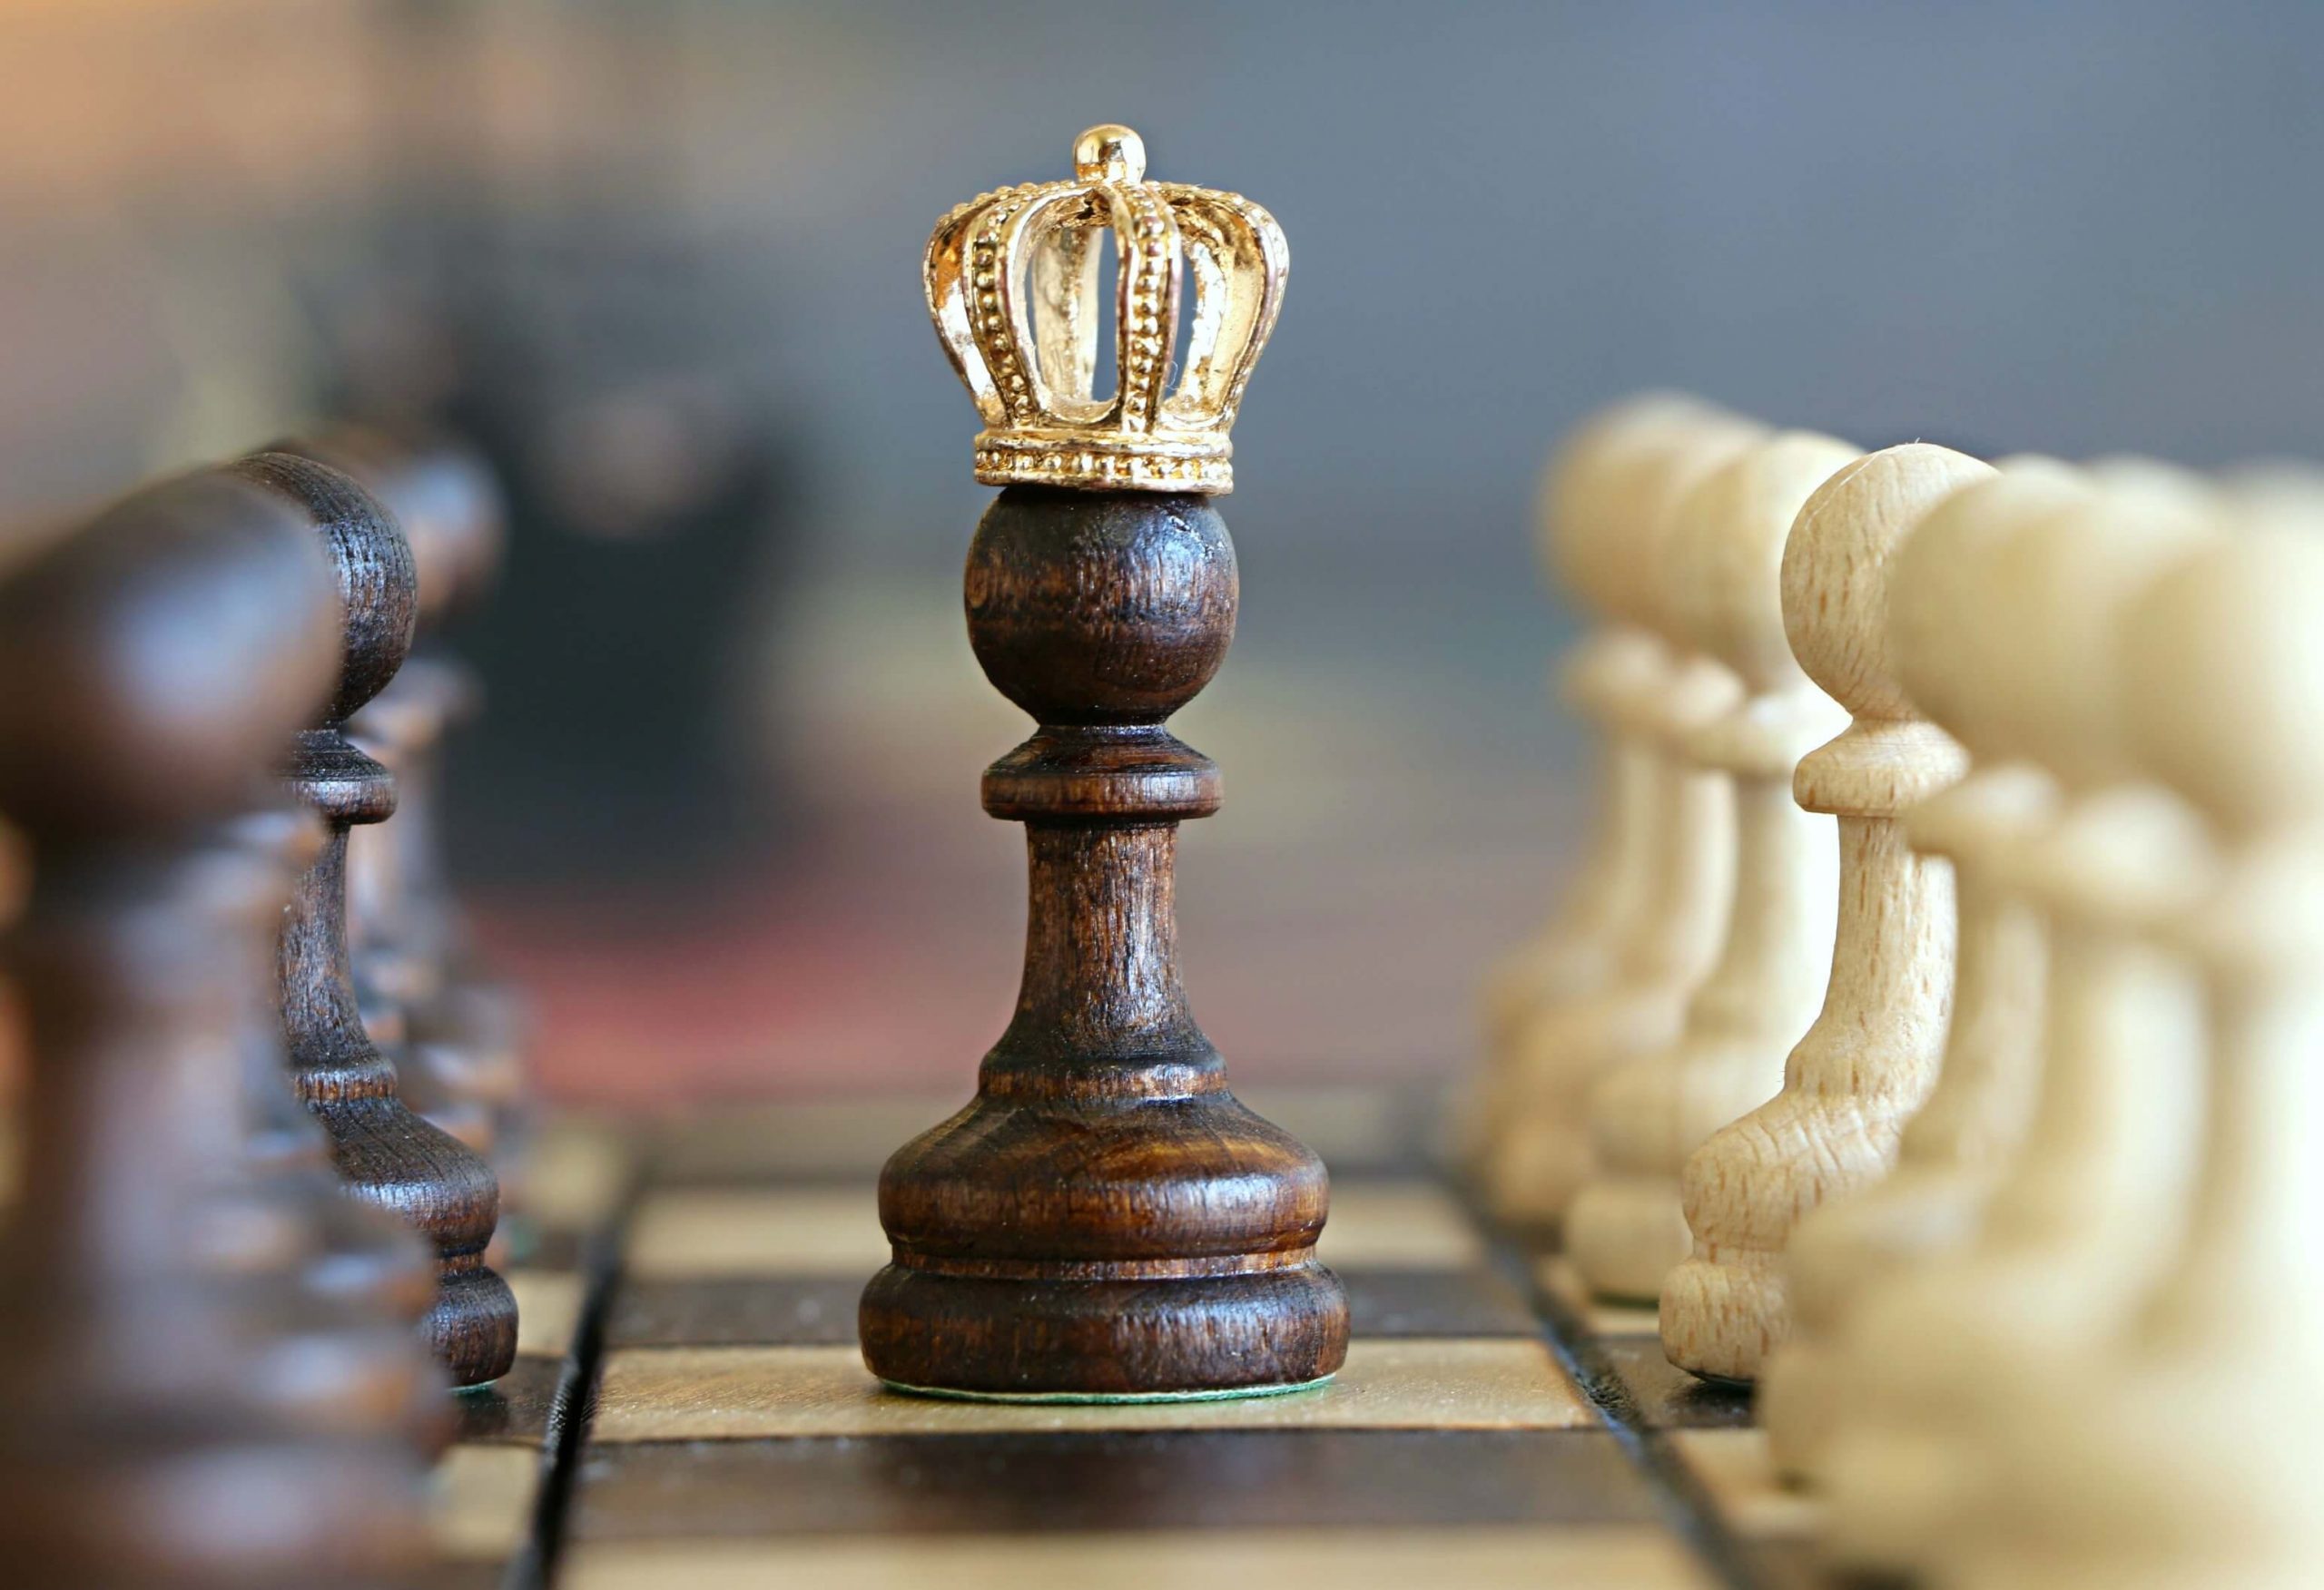 Could The Queen's Gambit put an end to male dominance in chess?